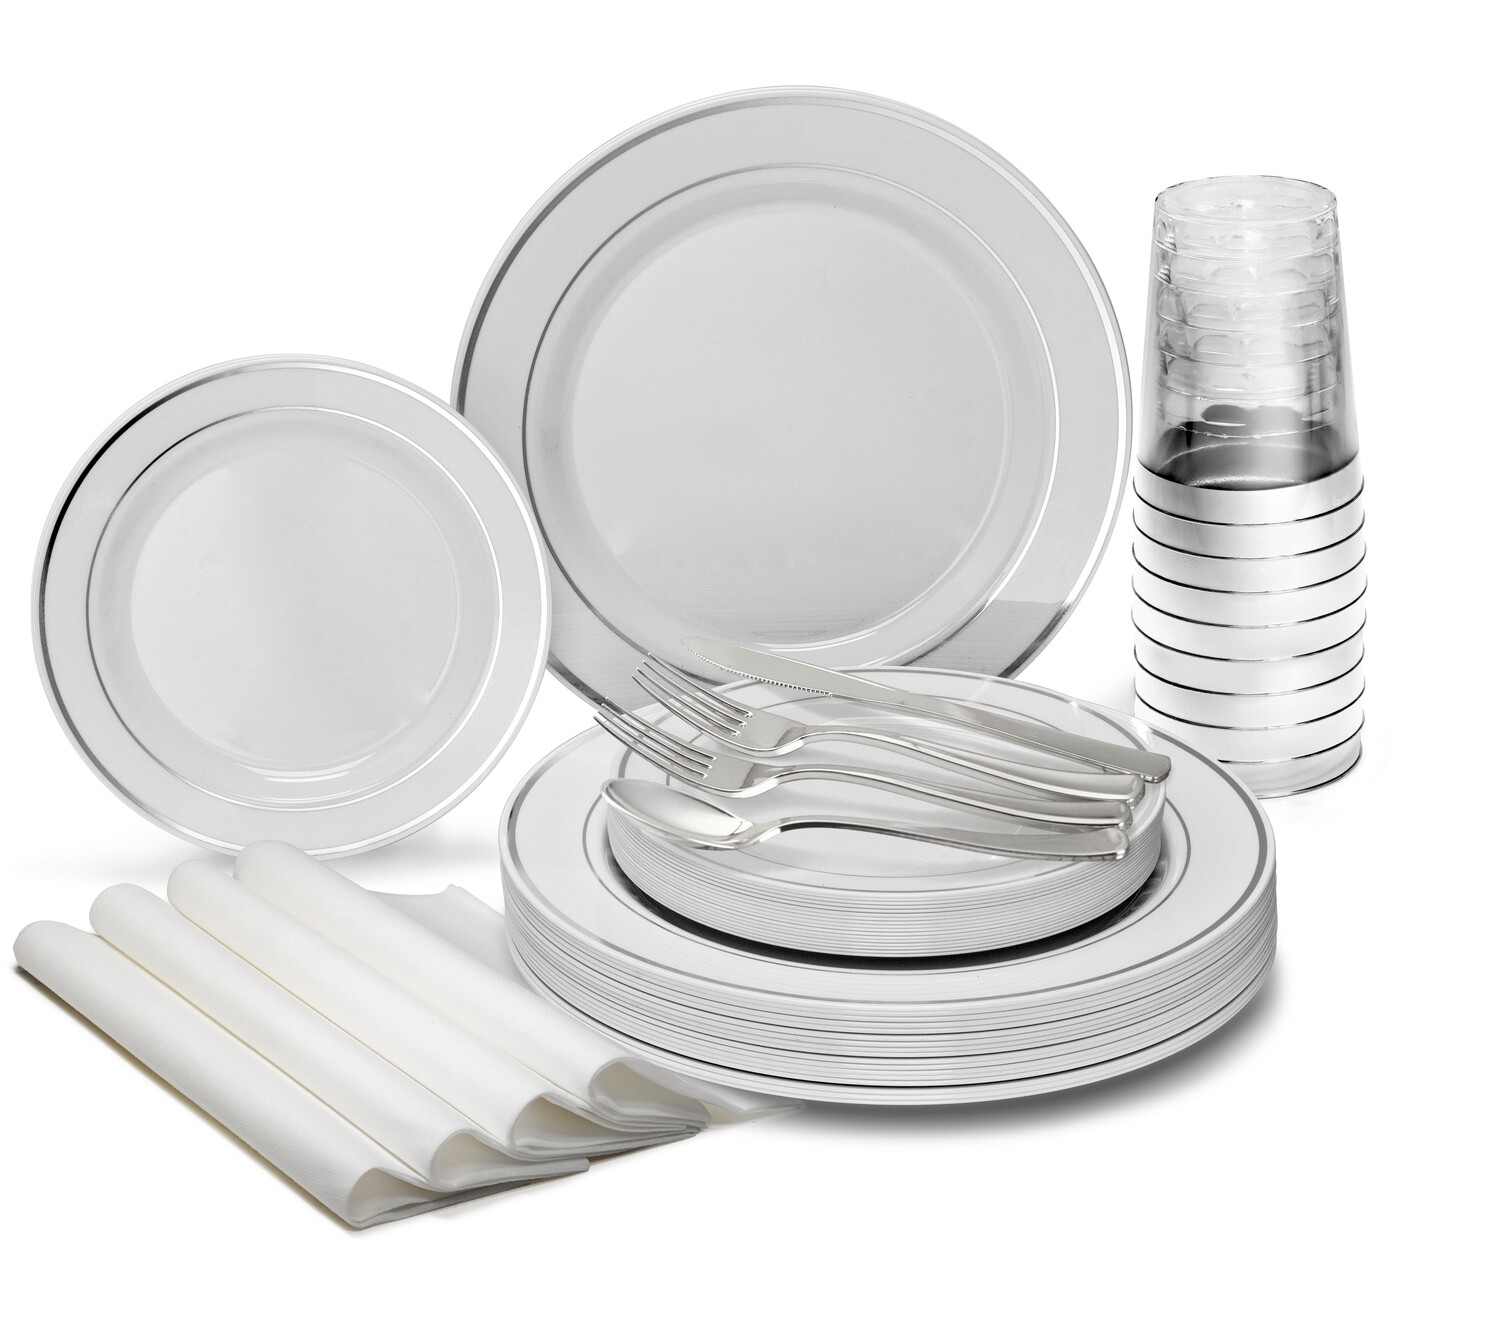 100pc. Plastic Party Plates White Gold Rim, 50 Premium 10.25in. Dinner  Plates and 50 Disposable 7.5in. Dessert Plates